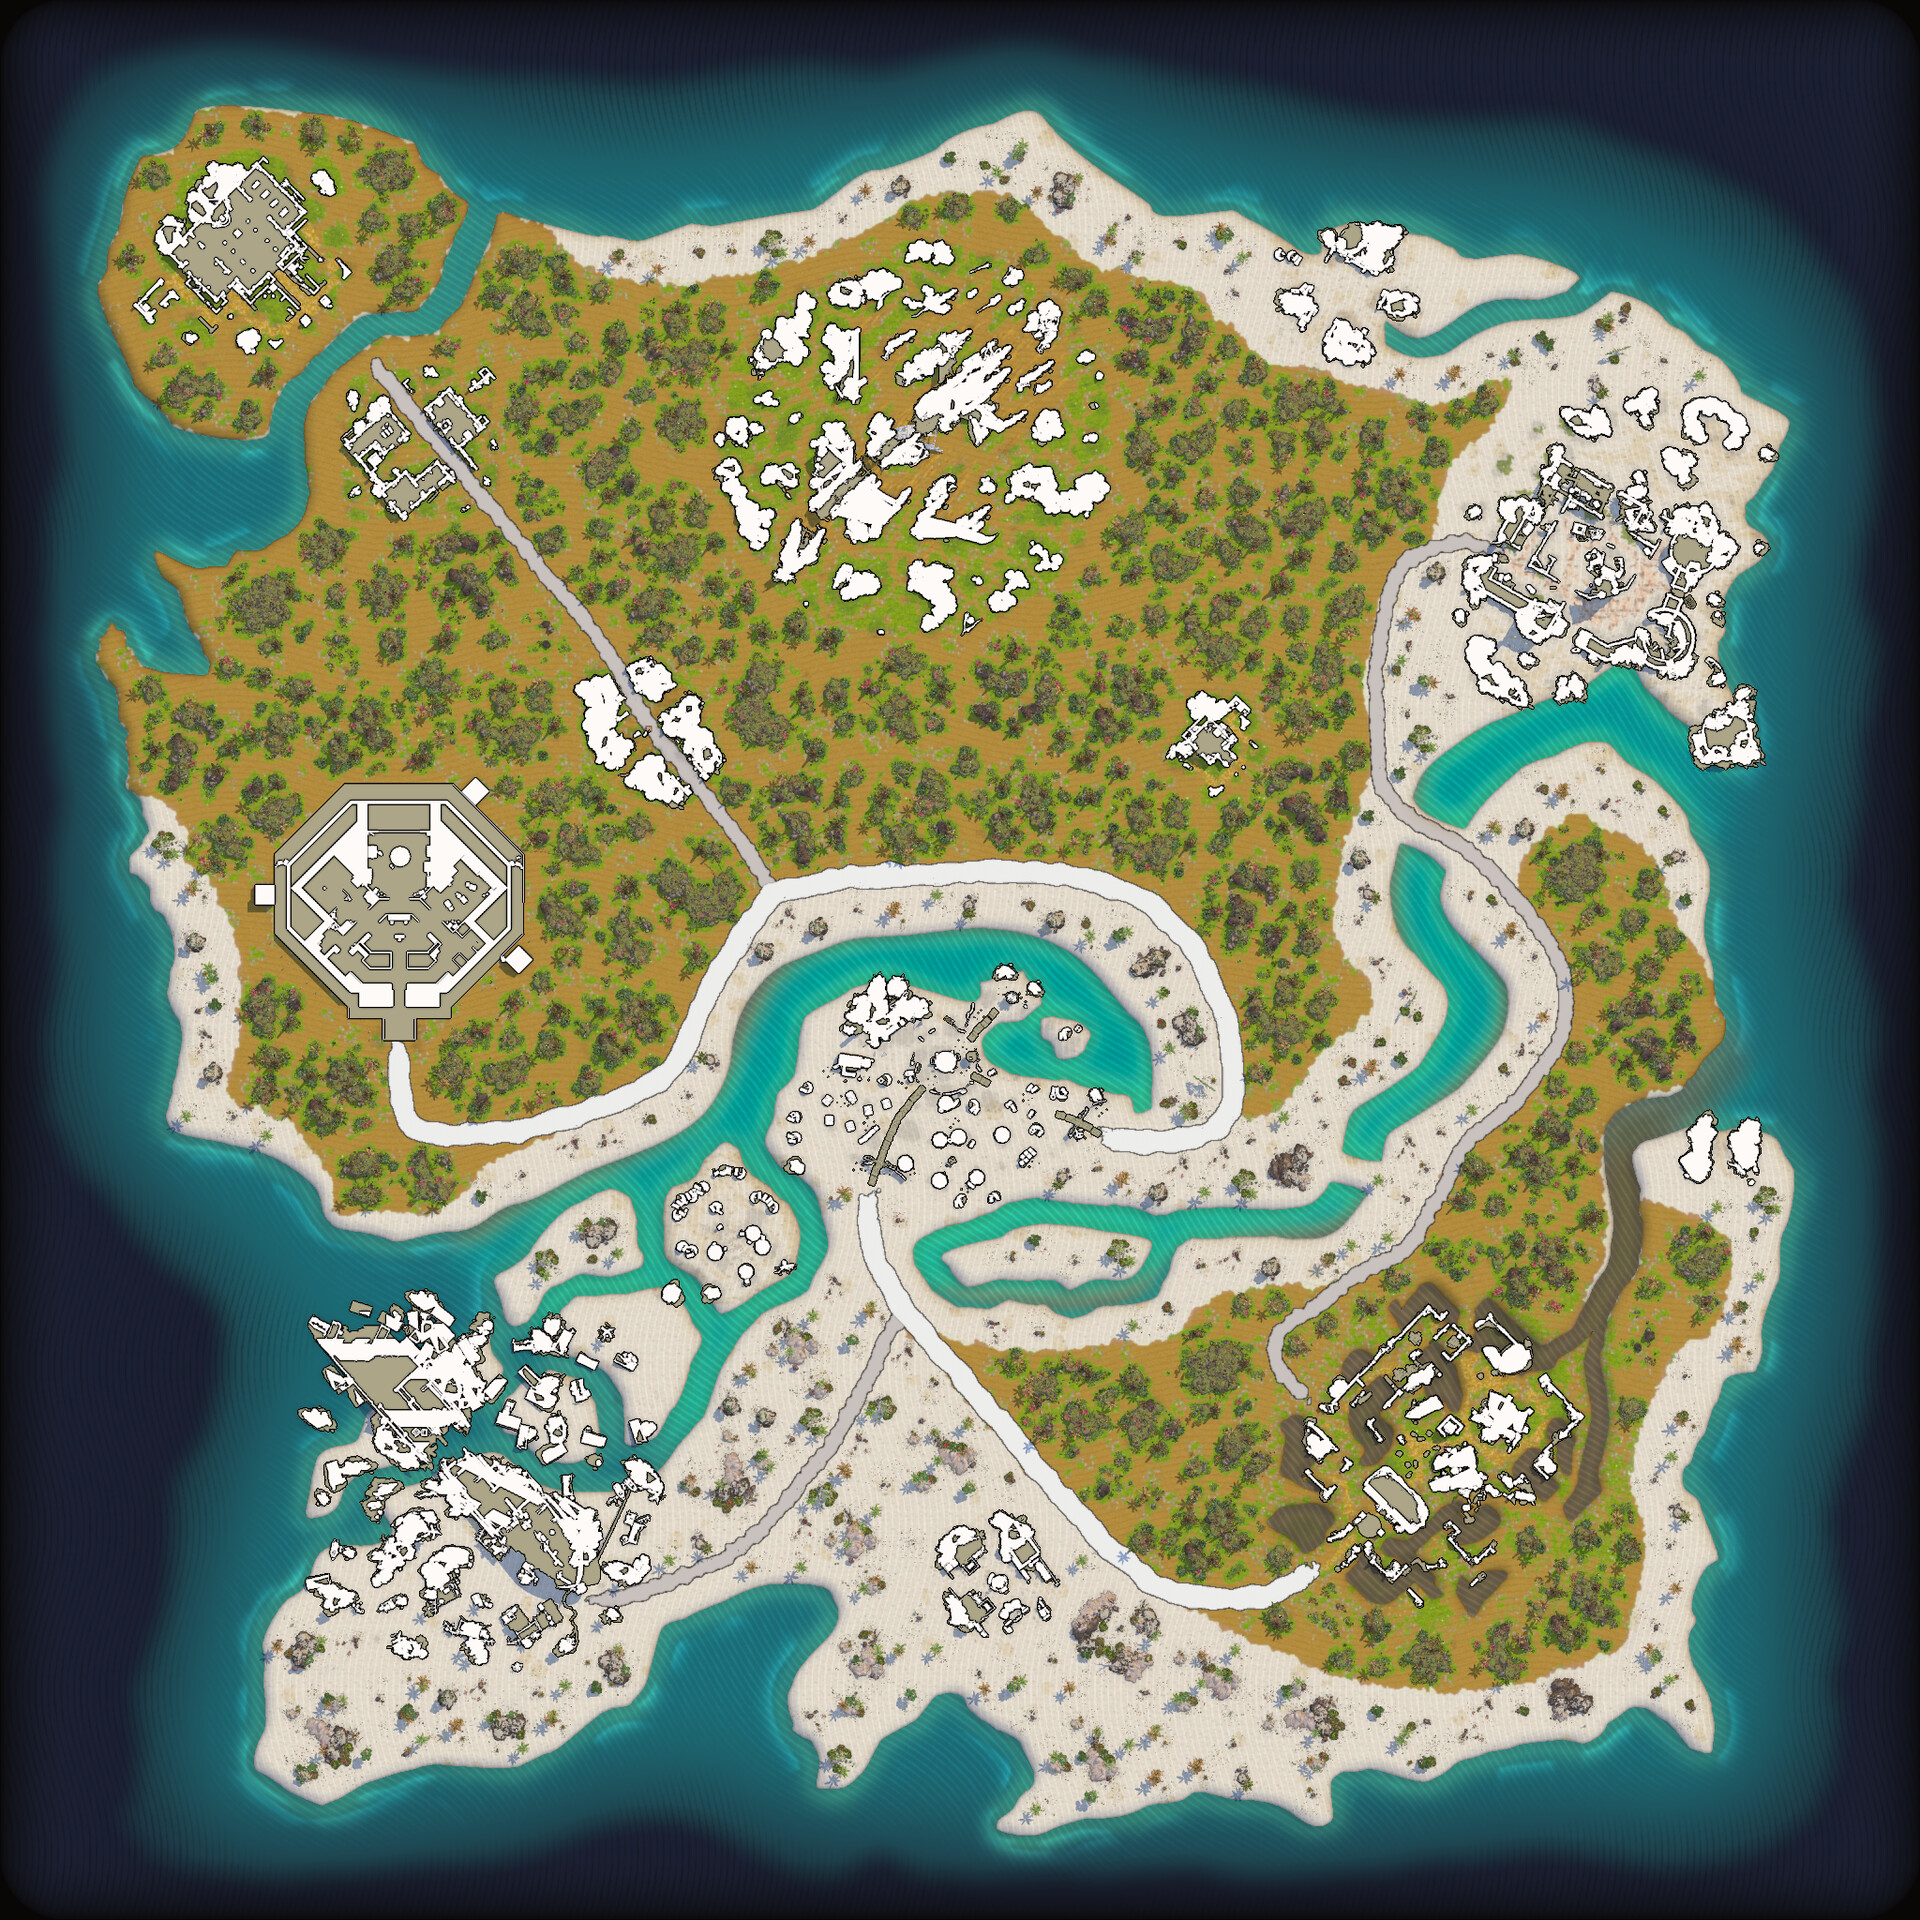 ArtStation - rs Life2 - Game Map